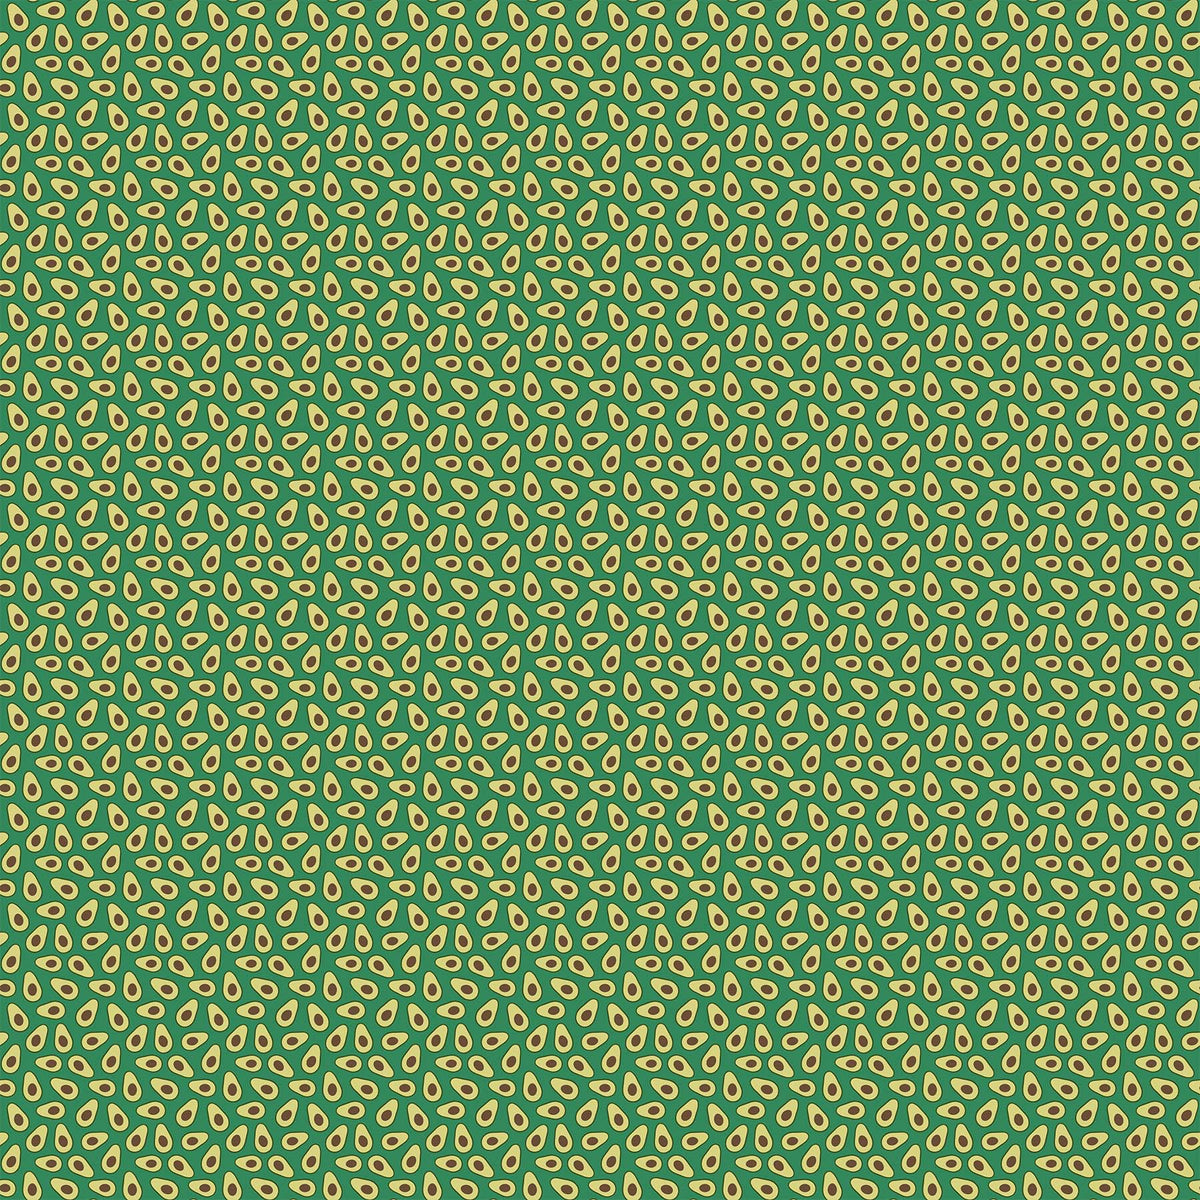 Avocado Love Quilt Fabric - Mini Avocados in Teal Green - 24583-68